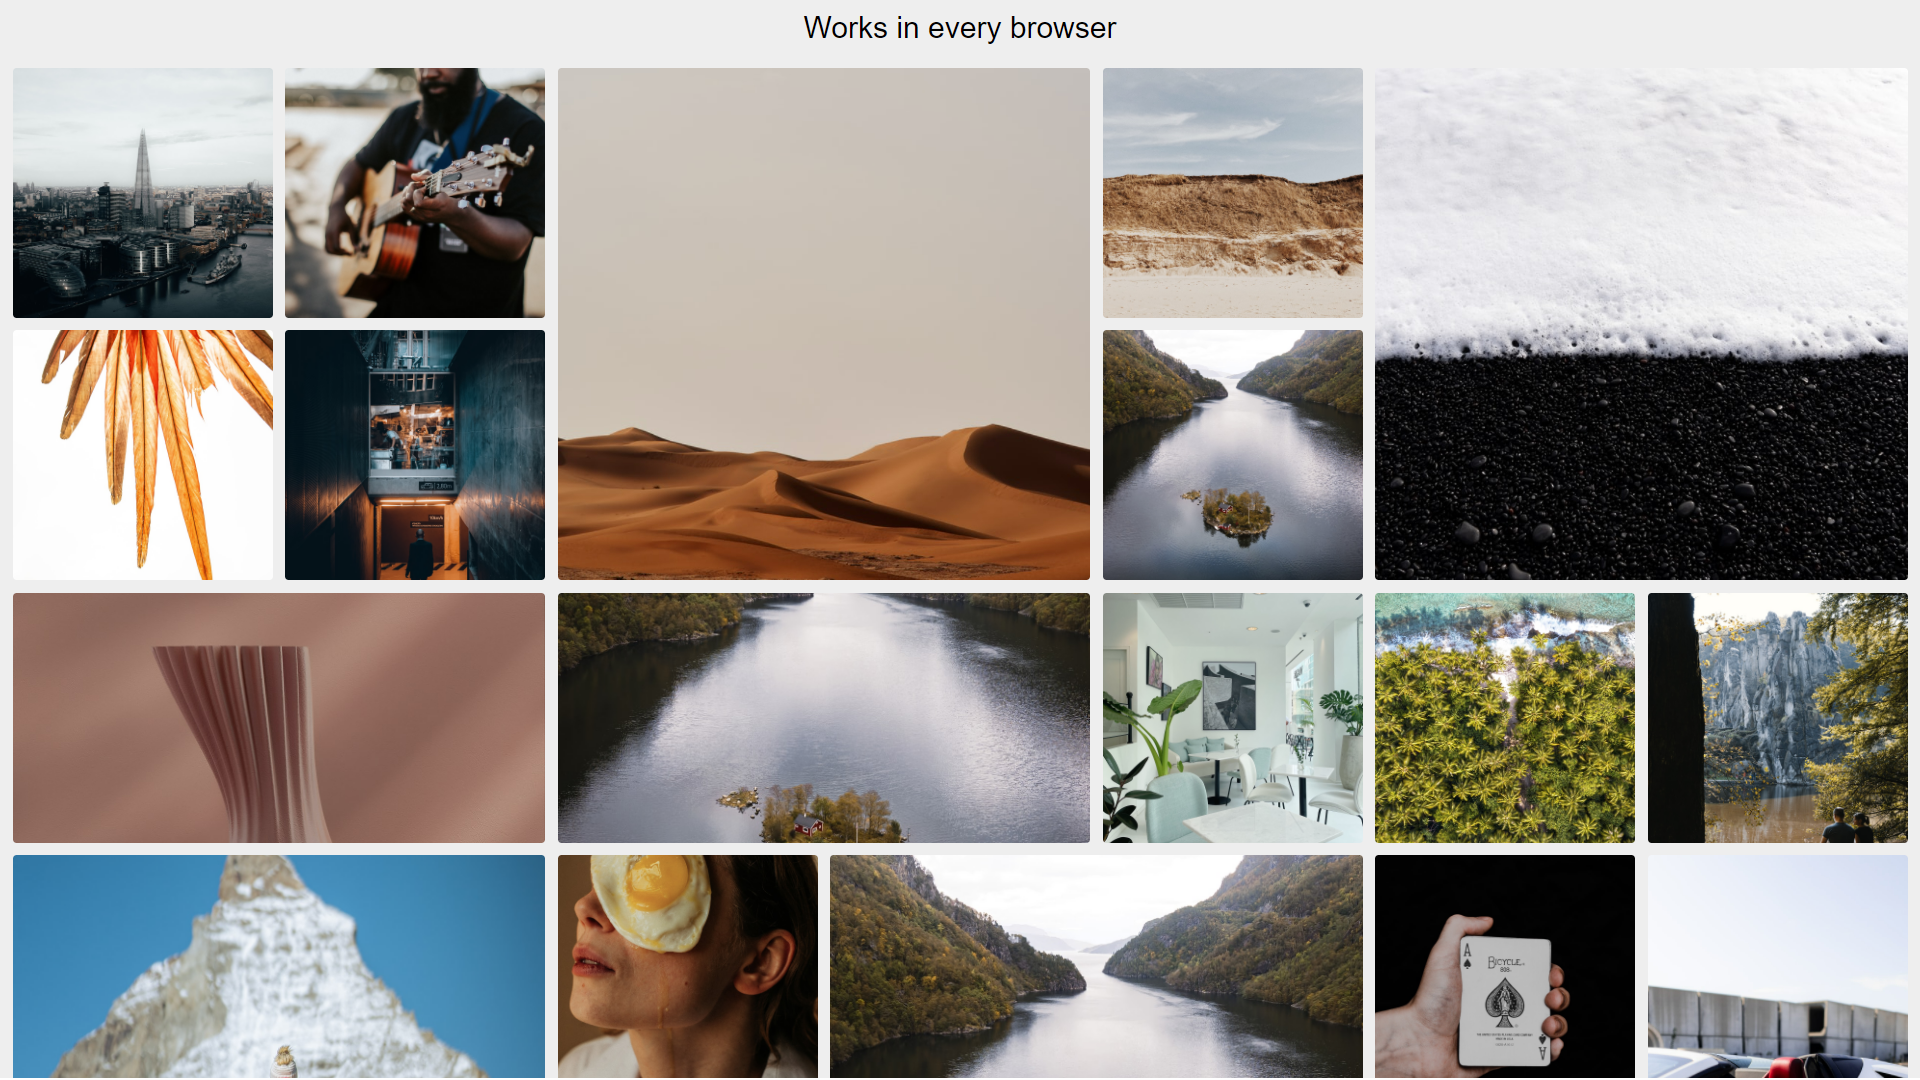 Responsive Lazy Loading Image Gallery